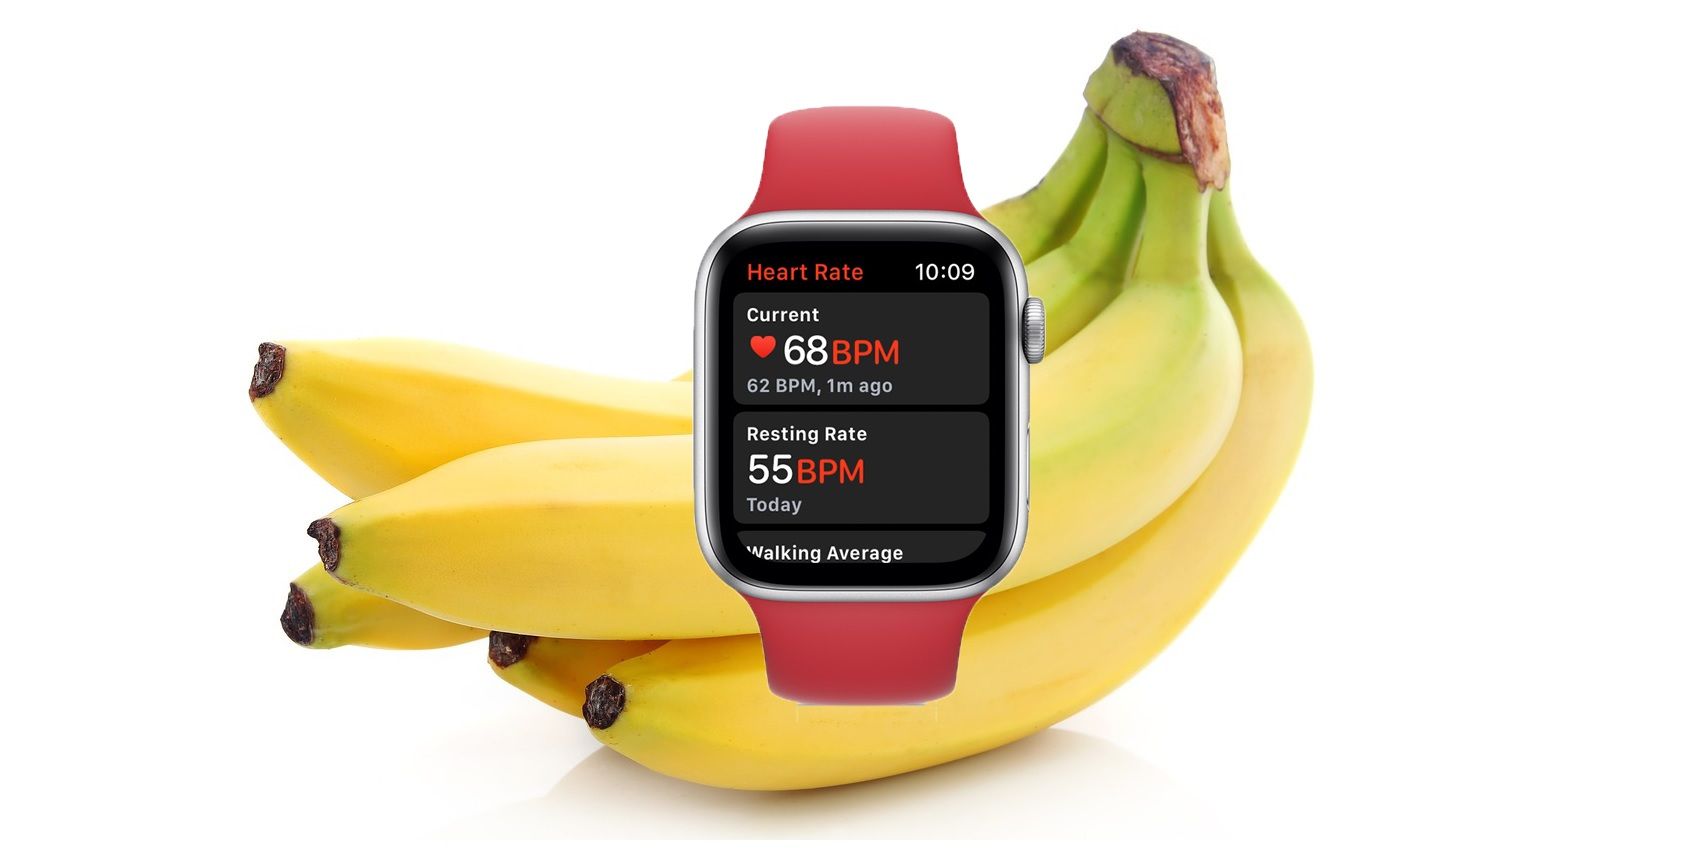 Heres Why The Apple Watch Thinks Bananas Have A Heart Rate